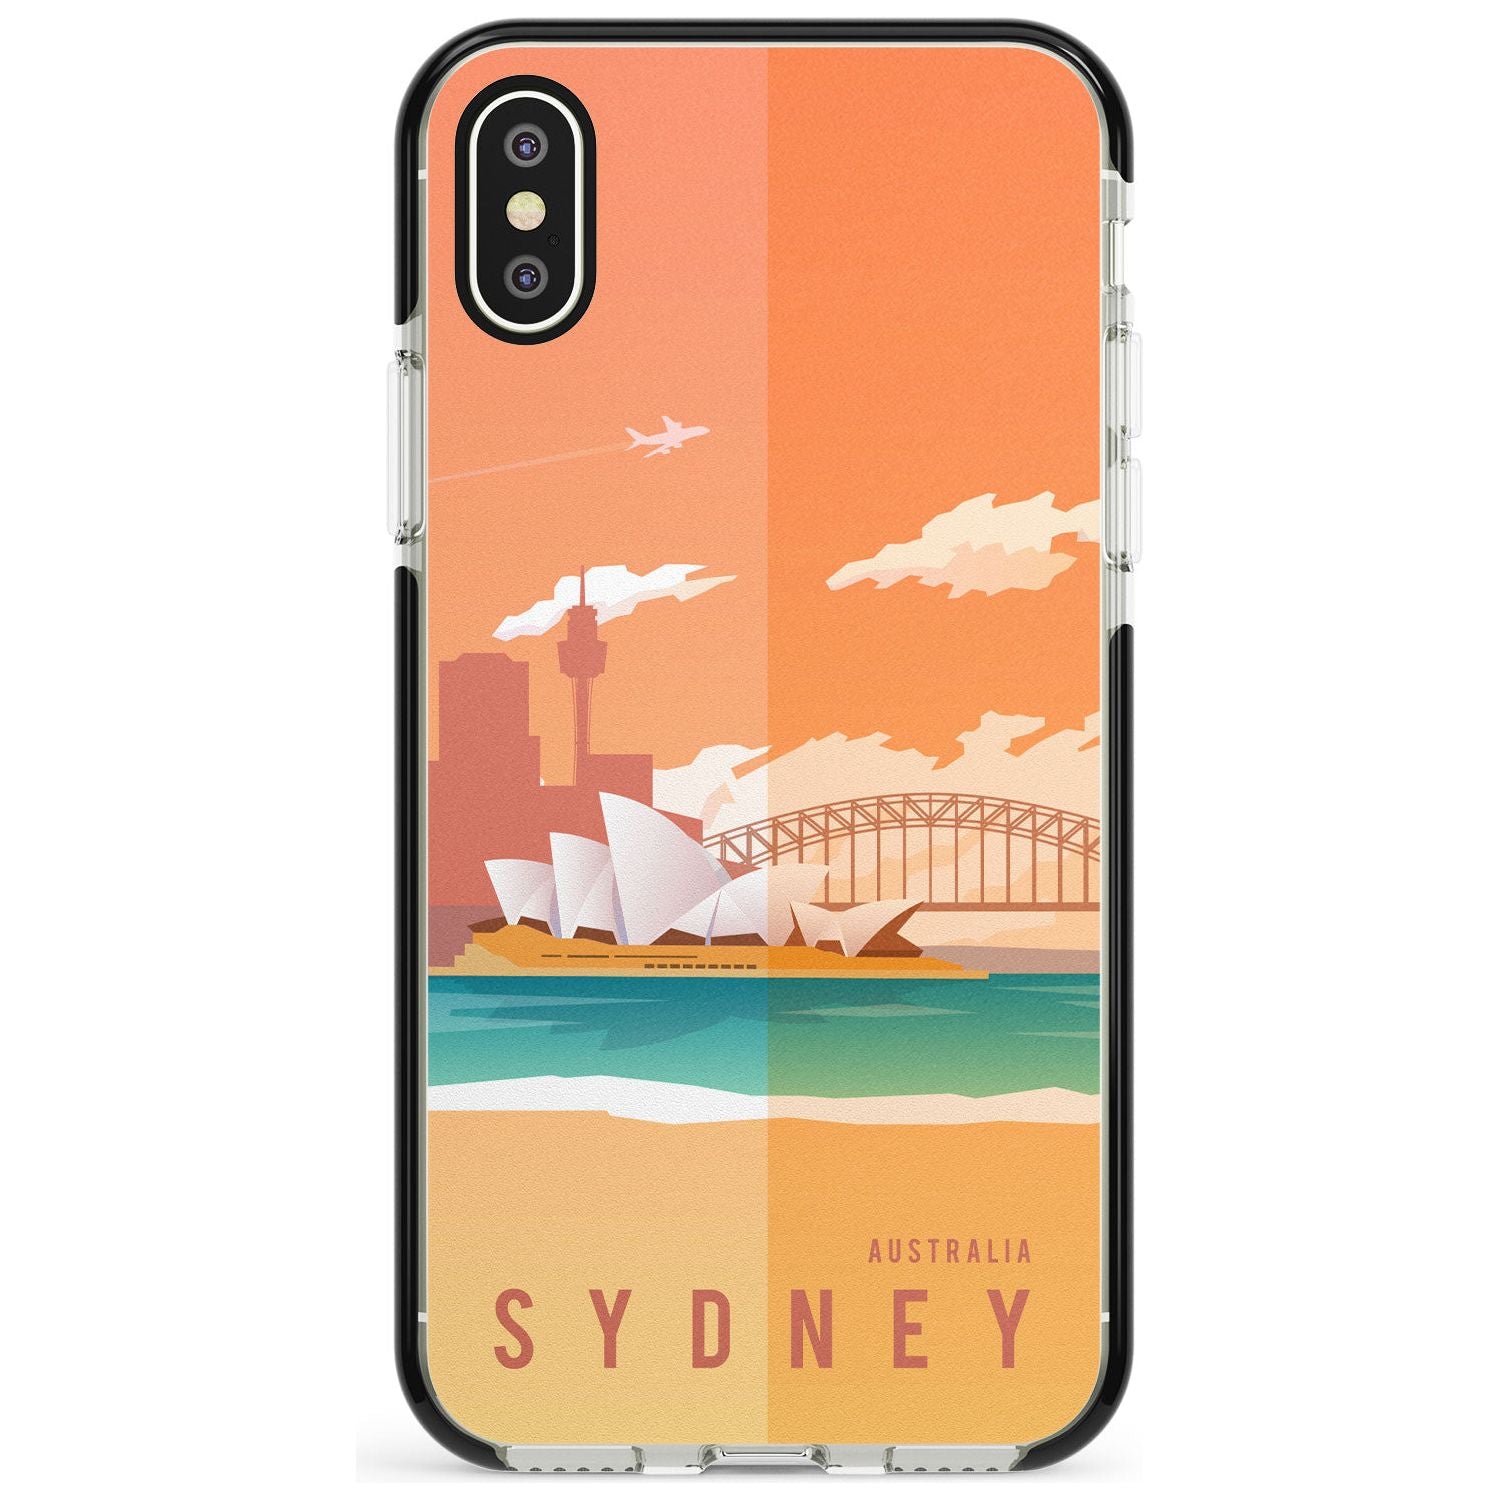 Vintage Travel Poster Sydney Black Impact Phone Case for iPhone X XS Max XR